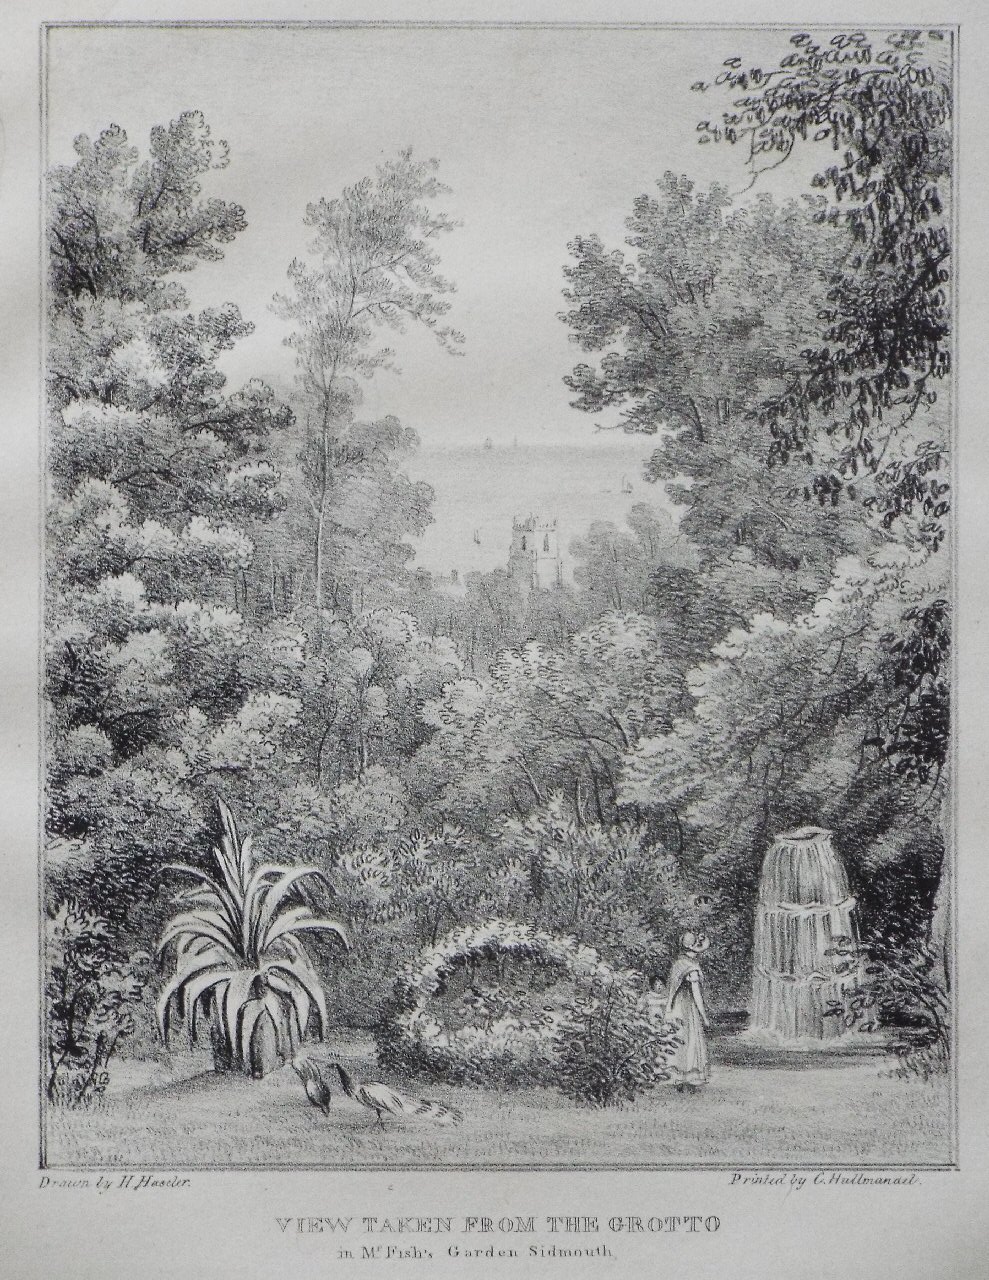 Lithograph - View taken from the Grotto in Mr. Fish's Garden, Sidmouth. - Haseler